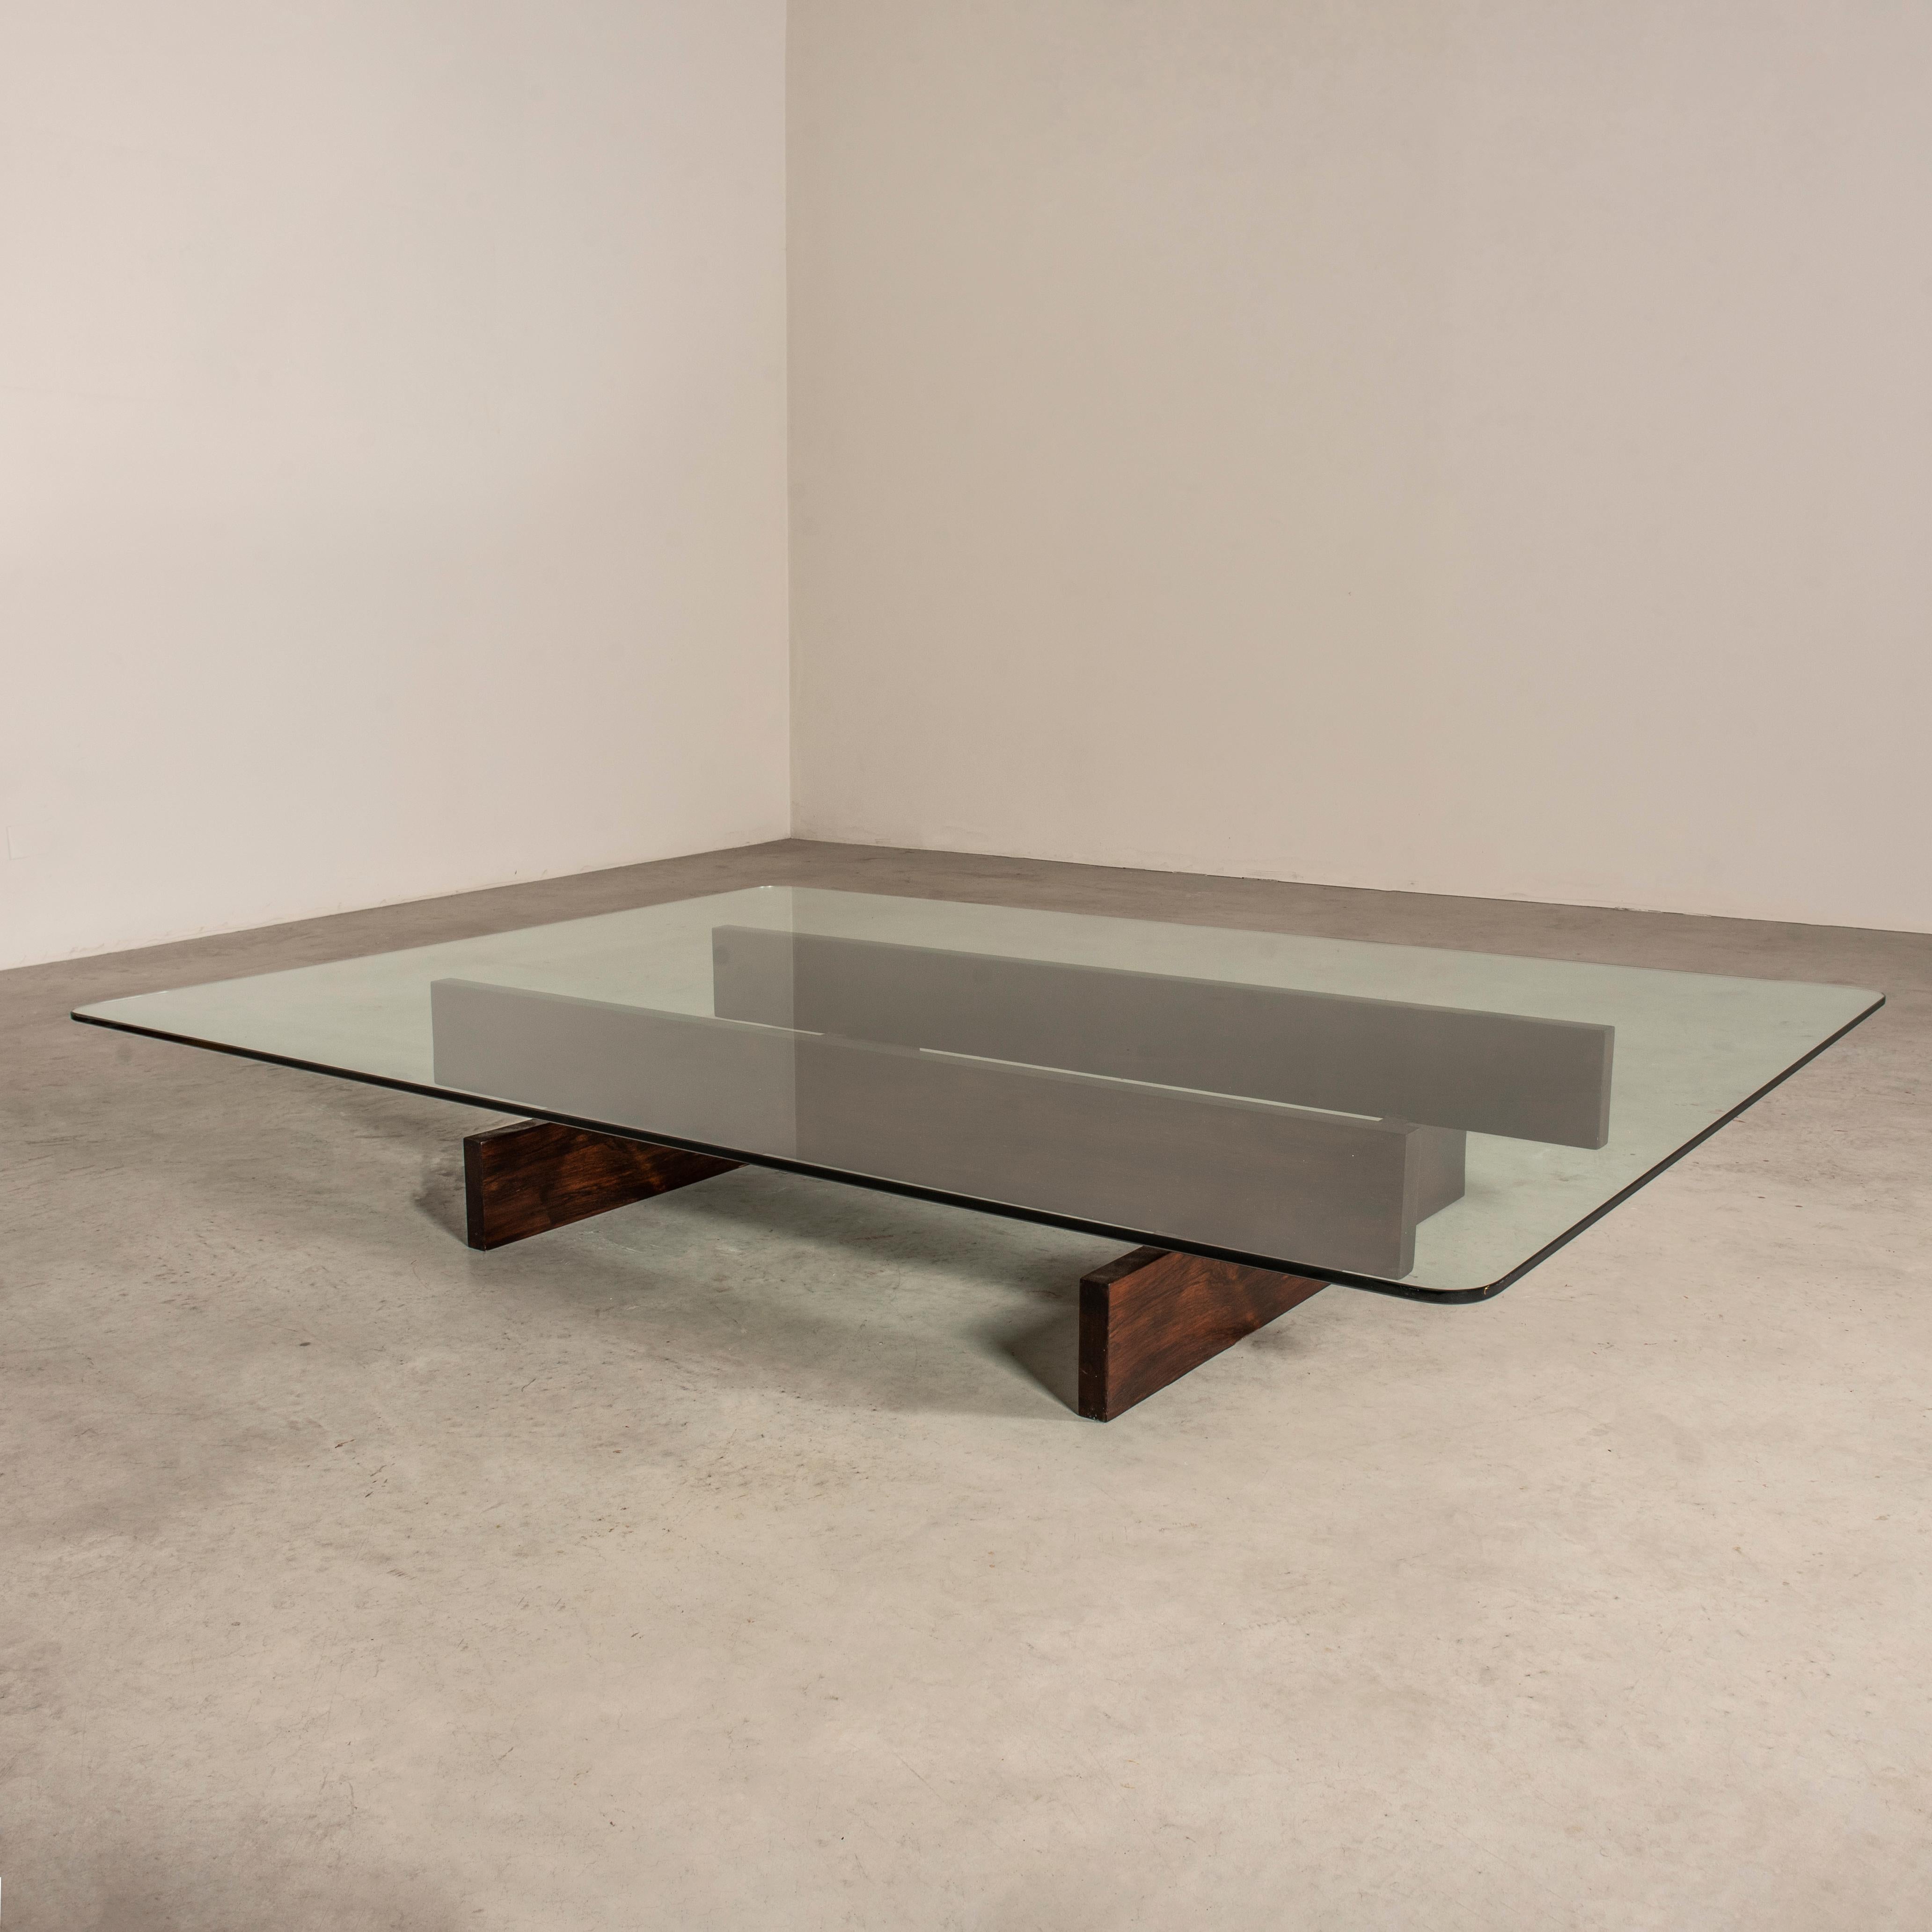 Grand Coffee Table in Wood and Glass by Celina Decorações, Brazilian Midcentury For Sale 1